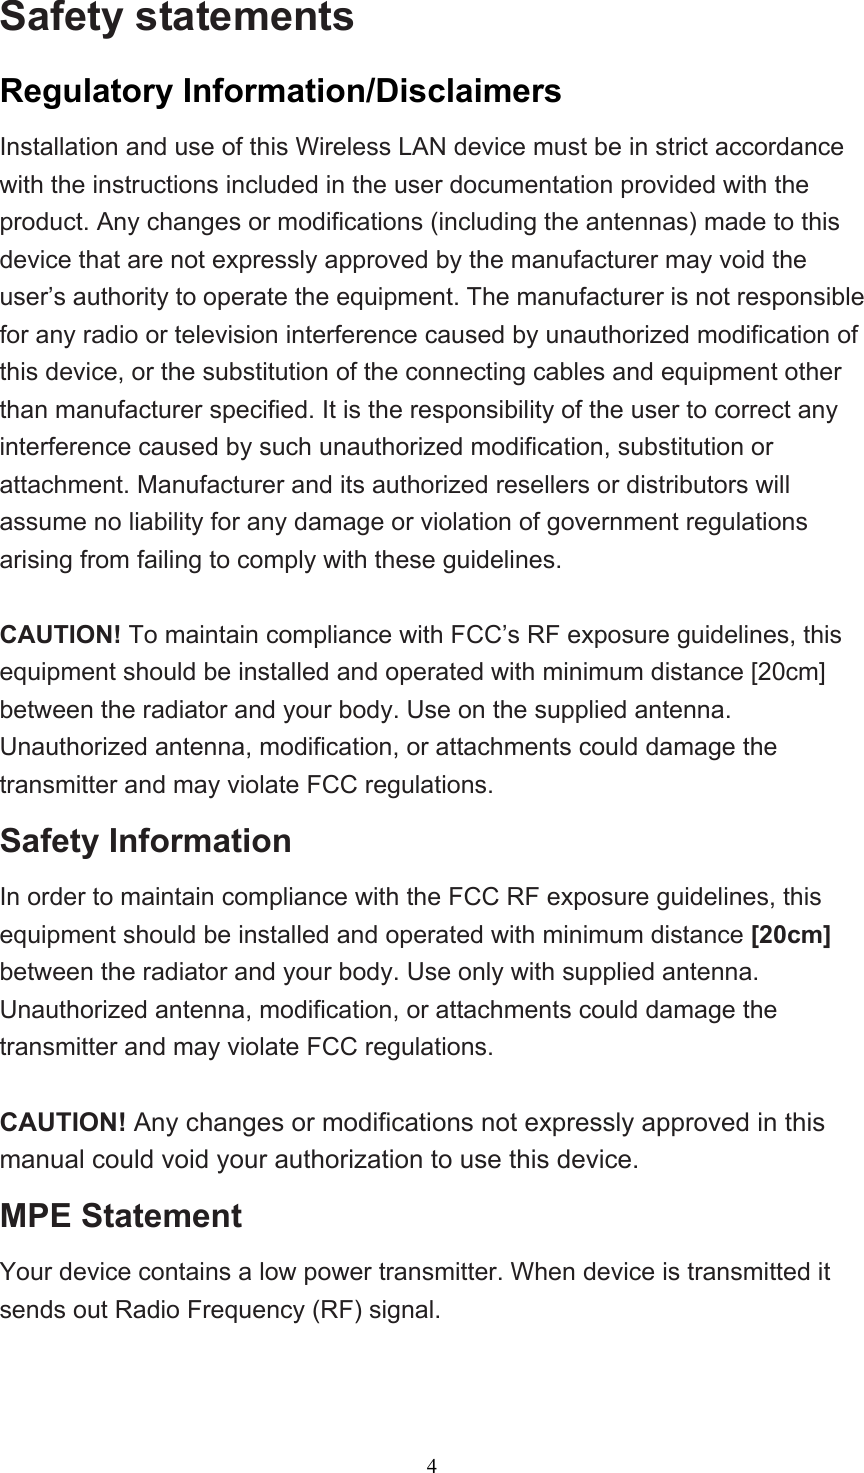  4Safety statements   Regulatory Information/Disclaimers Installation and use of this Wireless LAN device must be in strict accordance with the instructions included in the user documentation provided with the product. Any changes or modifications (including the antennas) made to this device that are not expressly approved by the manufacturer may void the user’s authority to operate the equipment. The manufacturer is not responsible for any radio or television interference caused by unauthorized modification of this device, or the substitution of the connecting cables and equipment other than manufacturer specified. It is the responsibility of the user to correct any interference caused by such unauthorized modification, substitution or attachment. Manufacturer and its authorized resellers or distributors will assume no liability for any damage or violation of government regulations arising from failing to comply with these guidelines.  CAUTION! To maintain compliance with FCC’s RF exposure guidelines, this equipment should be installed and operated with minimum distance [20cm] between the radiator and your body. Use on the supplied antenna. Unauthorized antenna, modification, or attachments could damage the transmitter and may violate FCC regulations. Safety Information In order to maintain compliance with the FCC RF exposure guidelines, this equipment should be installed and operated with minimum distance [20cm] between the radiator and your body. Use only with supplied antenna. Unauthorized antenna, modification, or attachments could damage the transmitter and may violate FCC regulations.  CAUTION! Any changes or modifications not expressly approved in this manual could void your authorization to use this device. MPE Statement Your device contains a low power transmitter. When device is transmitted it sends out Radio Frequency (RF) signal.   